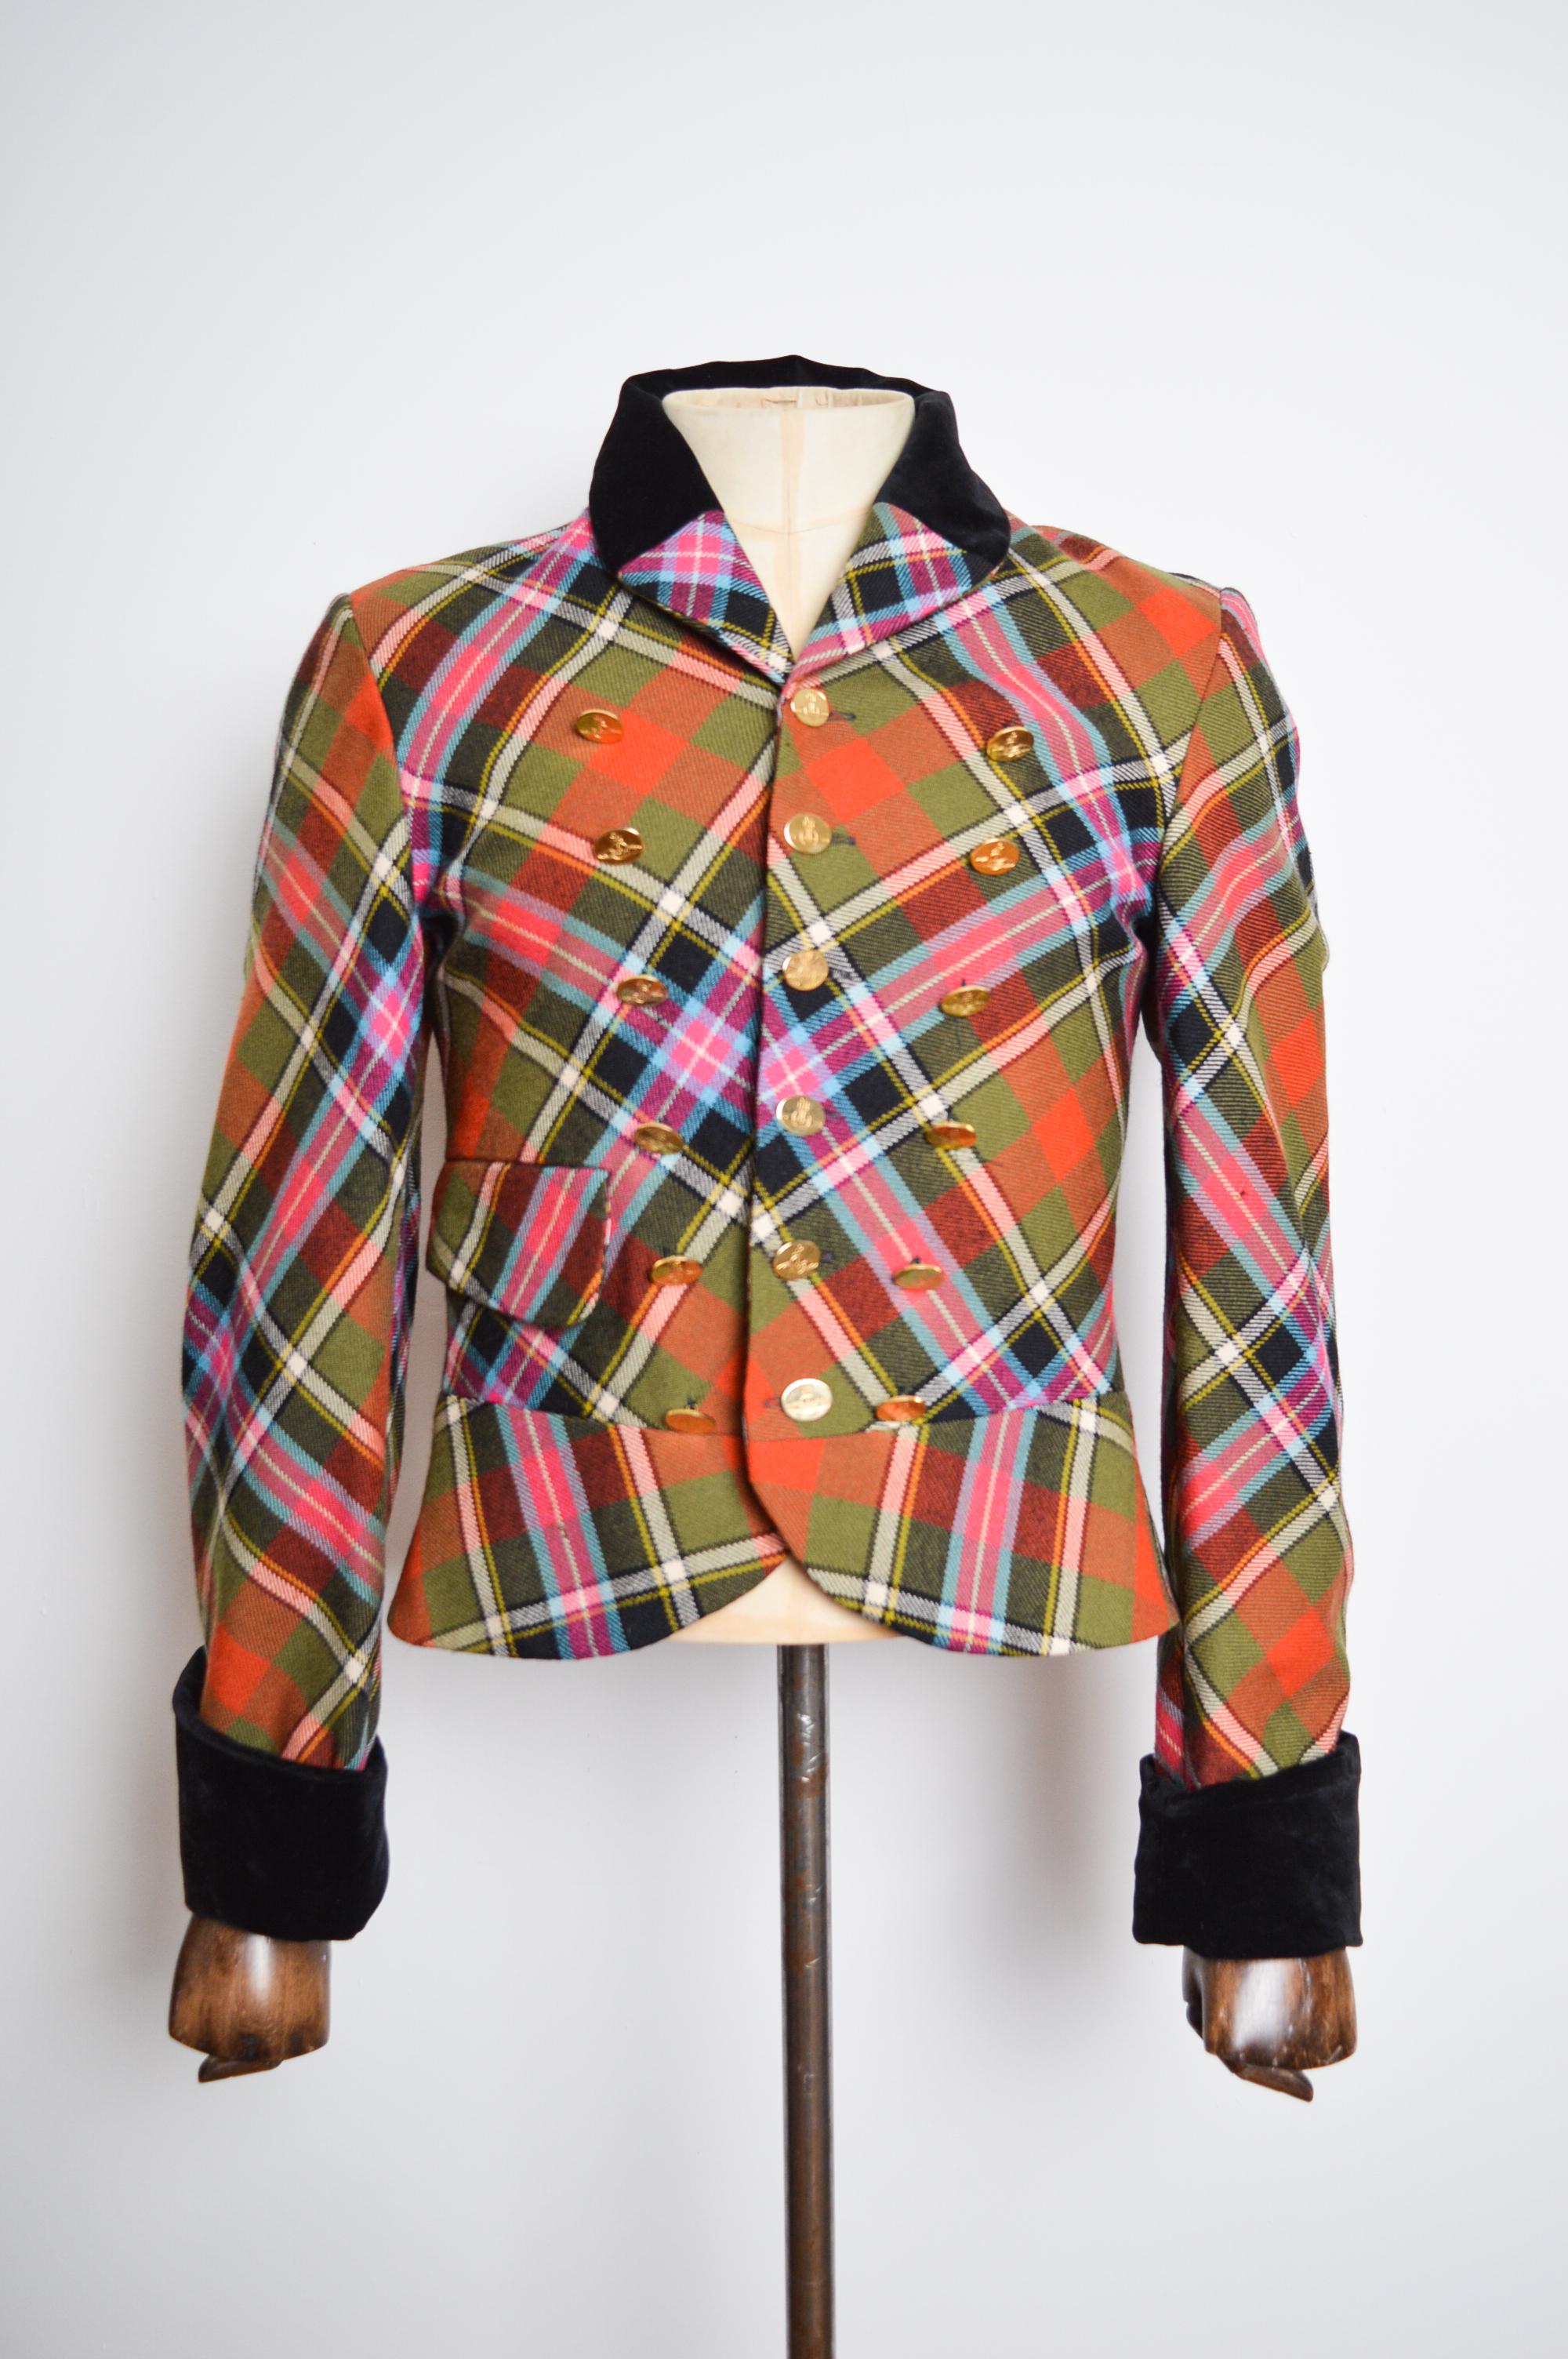 Superb Vivienne Westwood 'Bruce of Kinnaird' Tartan mens jacket from the AW 1988/ 89 'Time Machine' Collection.

MADE IN ENGLAND.  

Features: Velvet Collar, Long sleeves, Satin lined interior, 18 Individually Embossed Orb Buttons, Single hip pocket